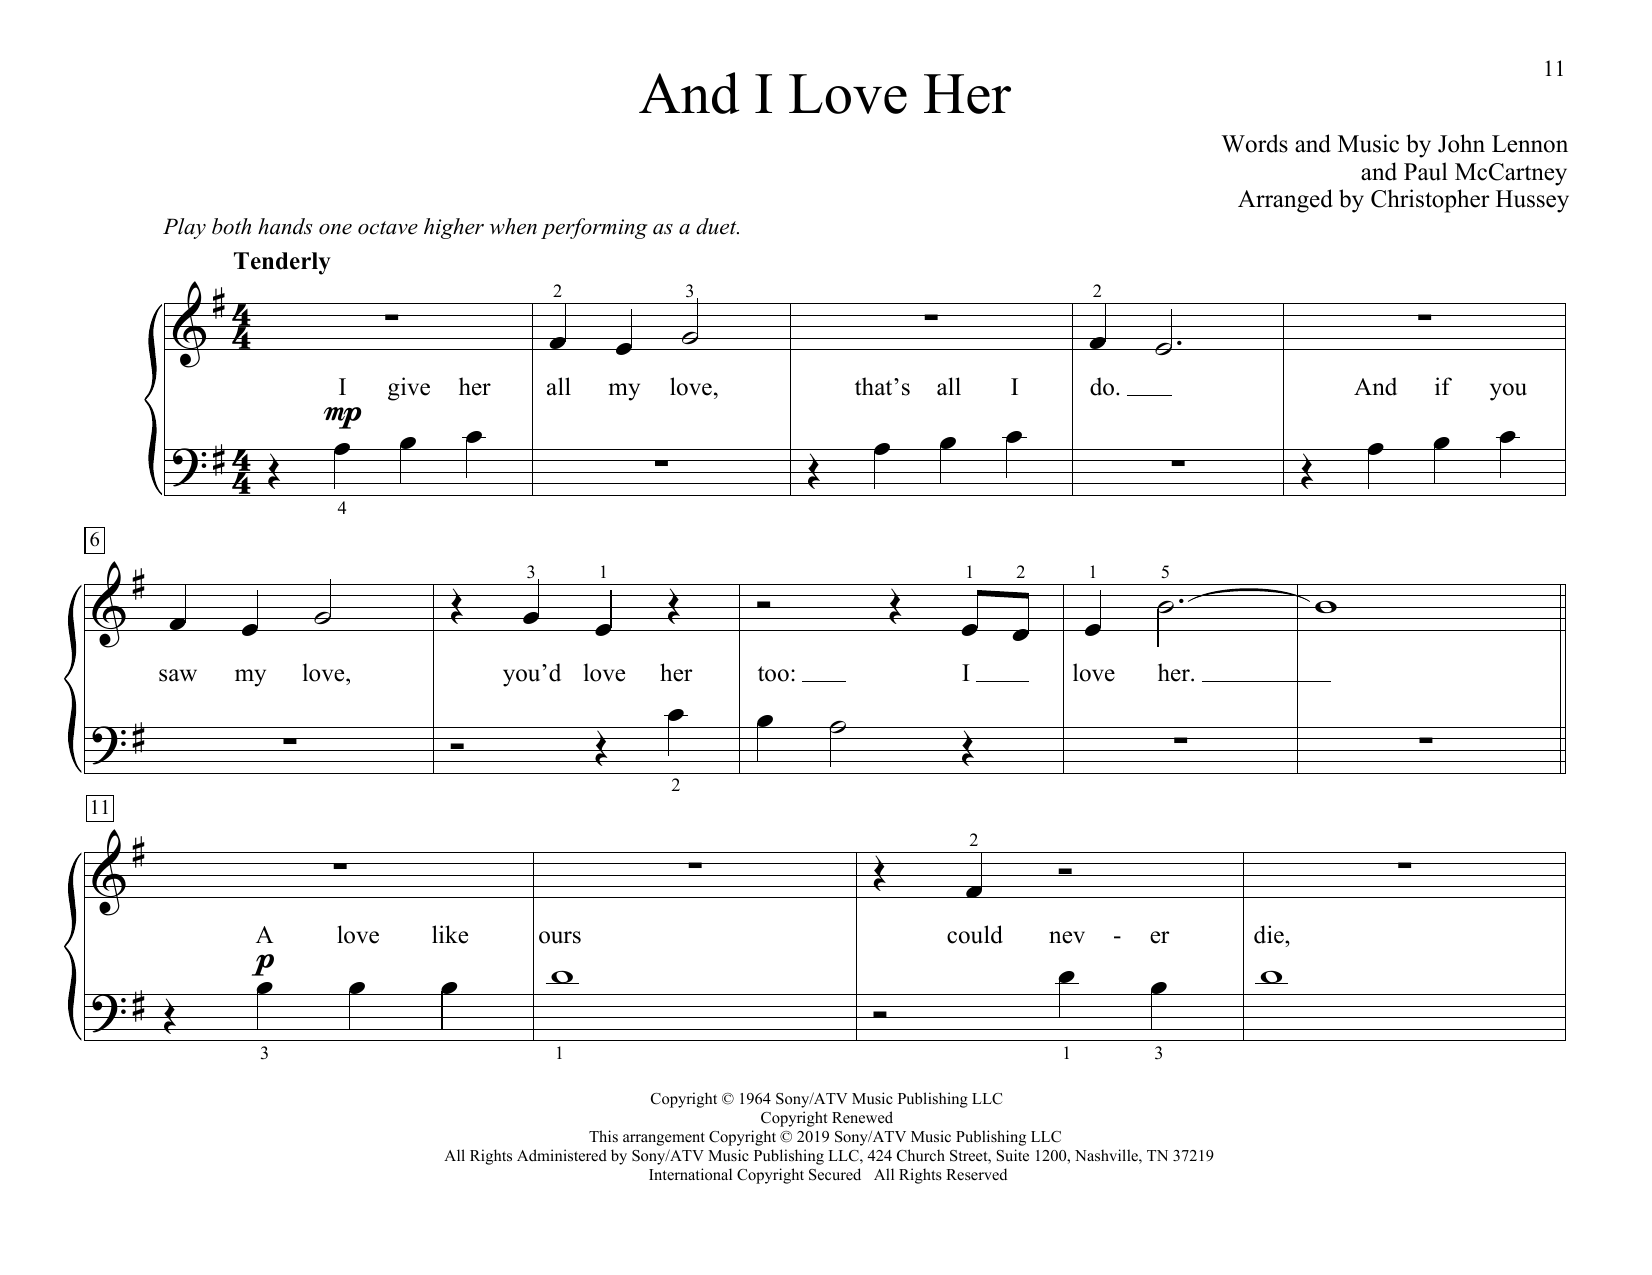 Download The Beatles And I Love Her (arr. Christopher Hussey Sheet Music